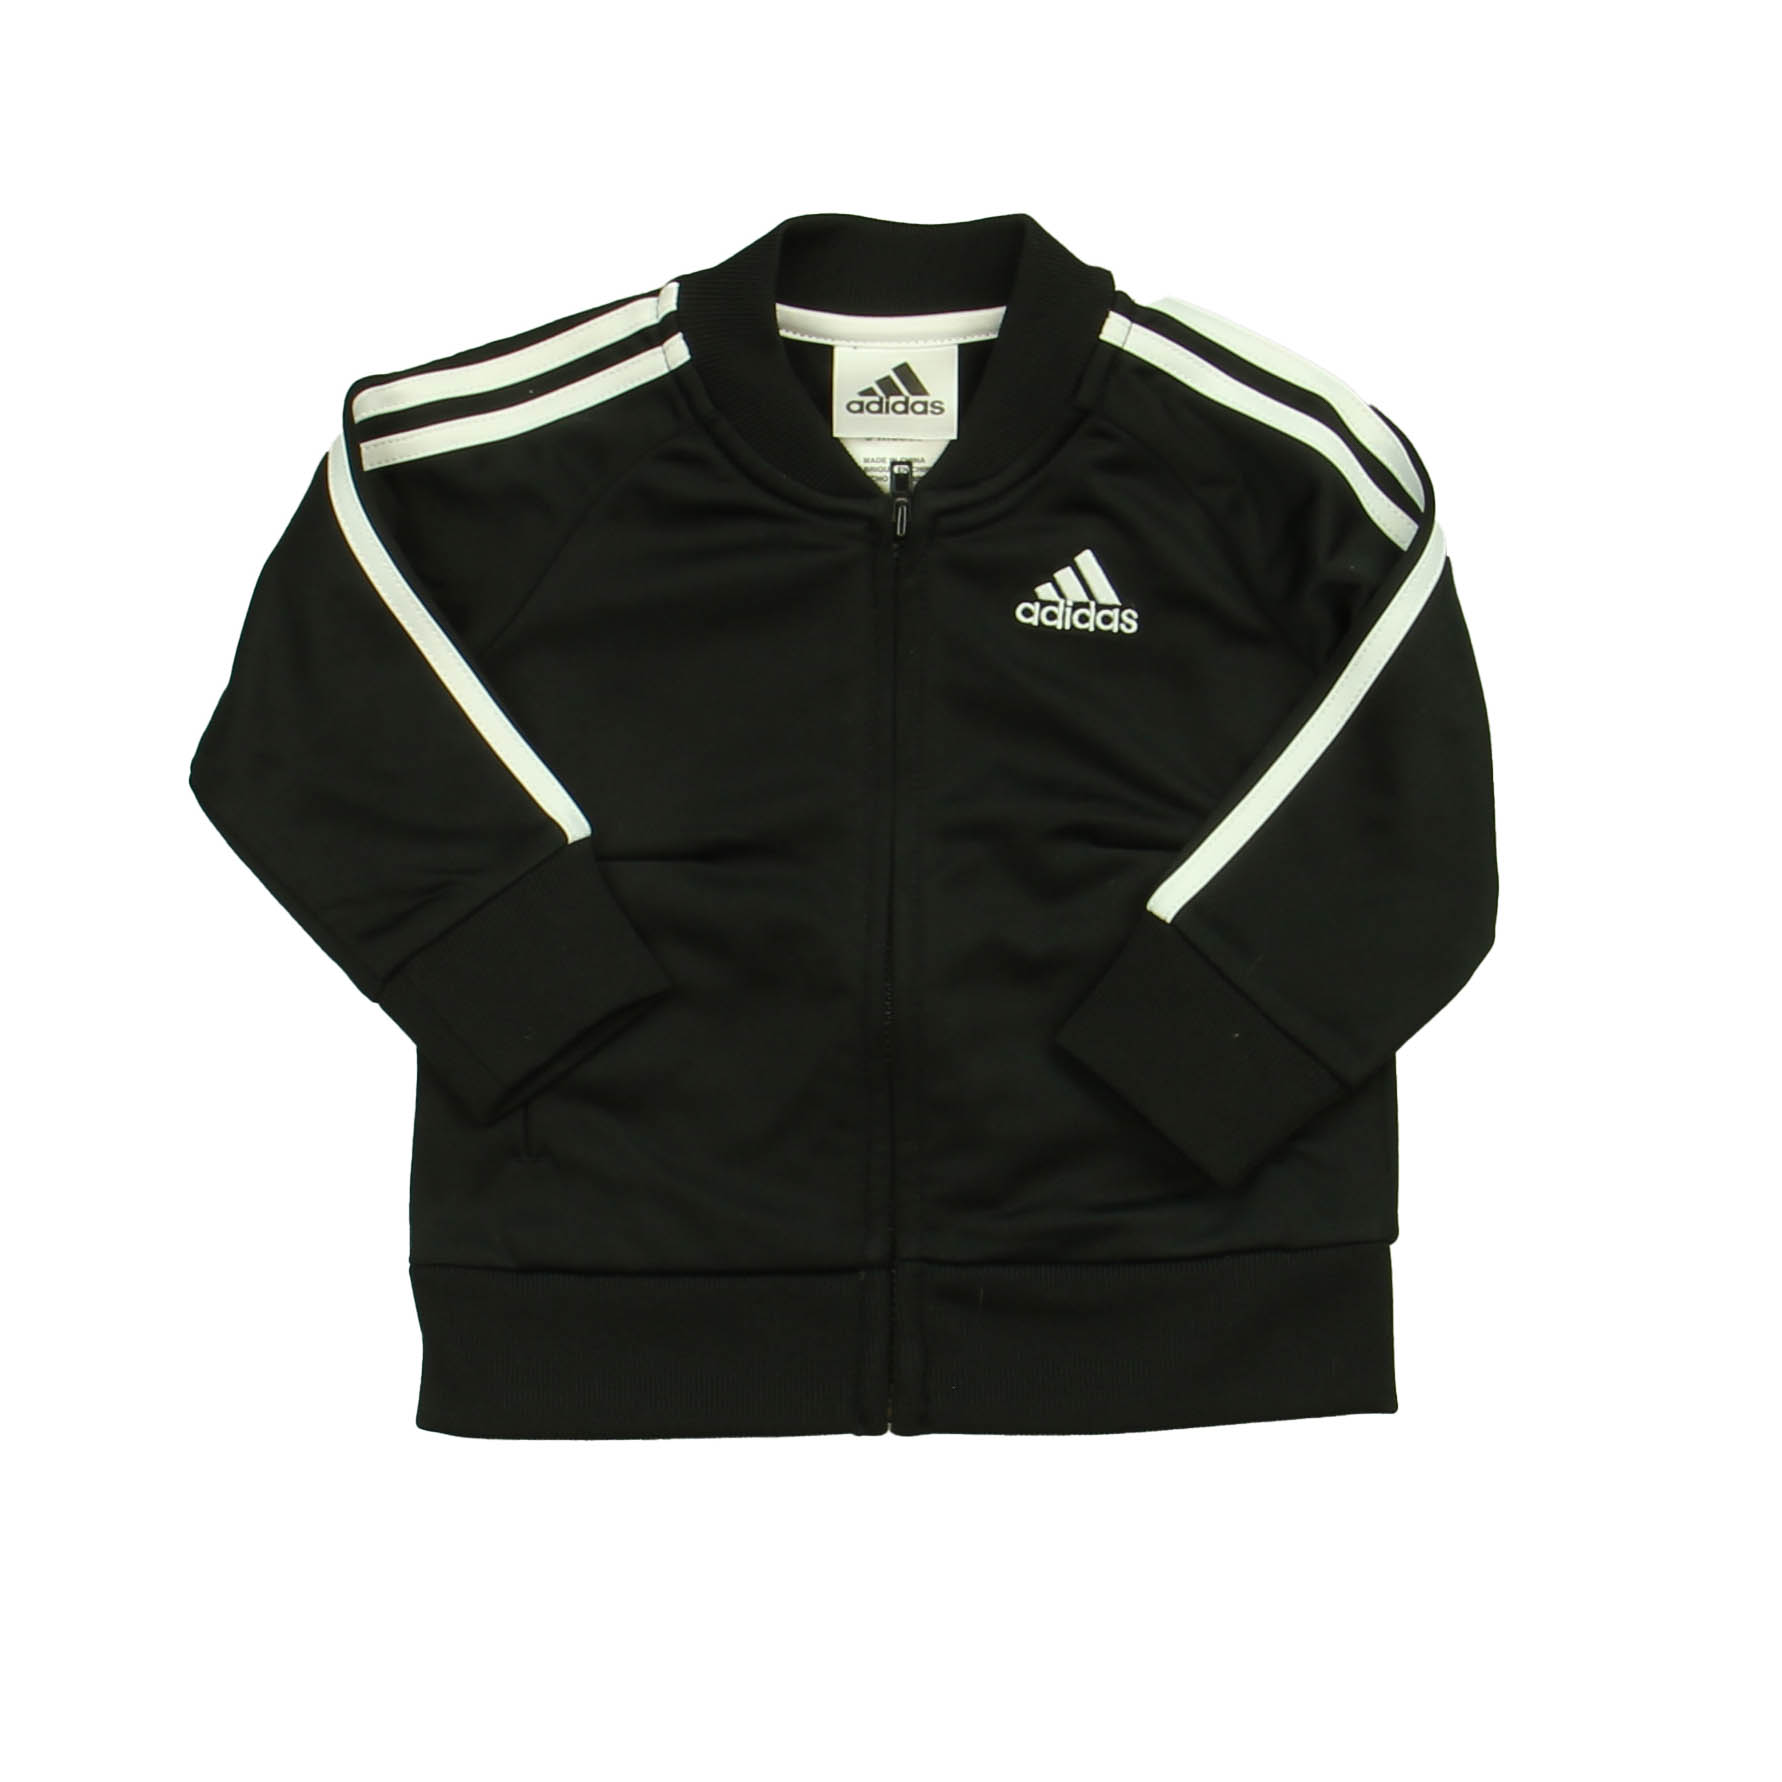 Pre-owned Adidas Boys Black | White Jacket size: 9 Months - image 1 of 1